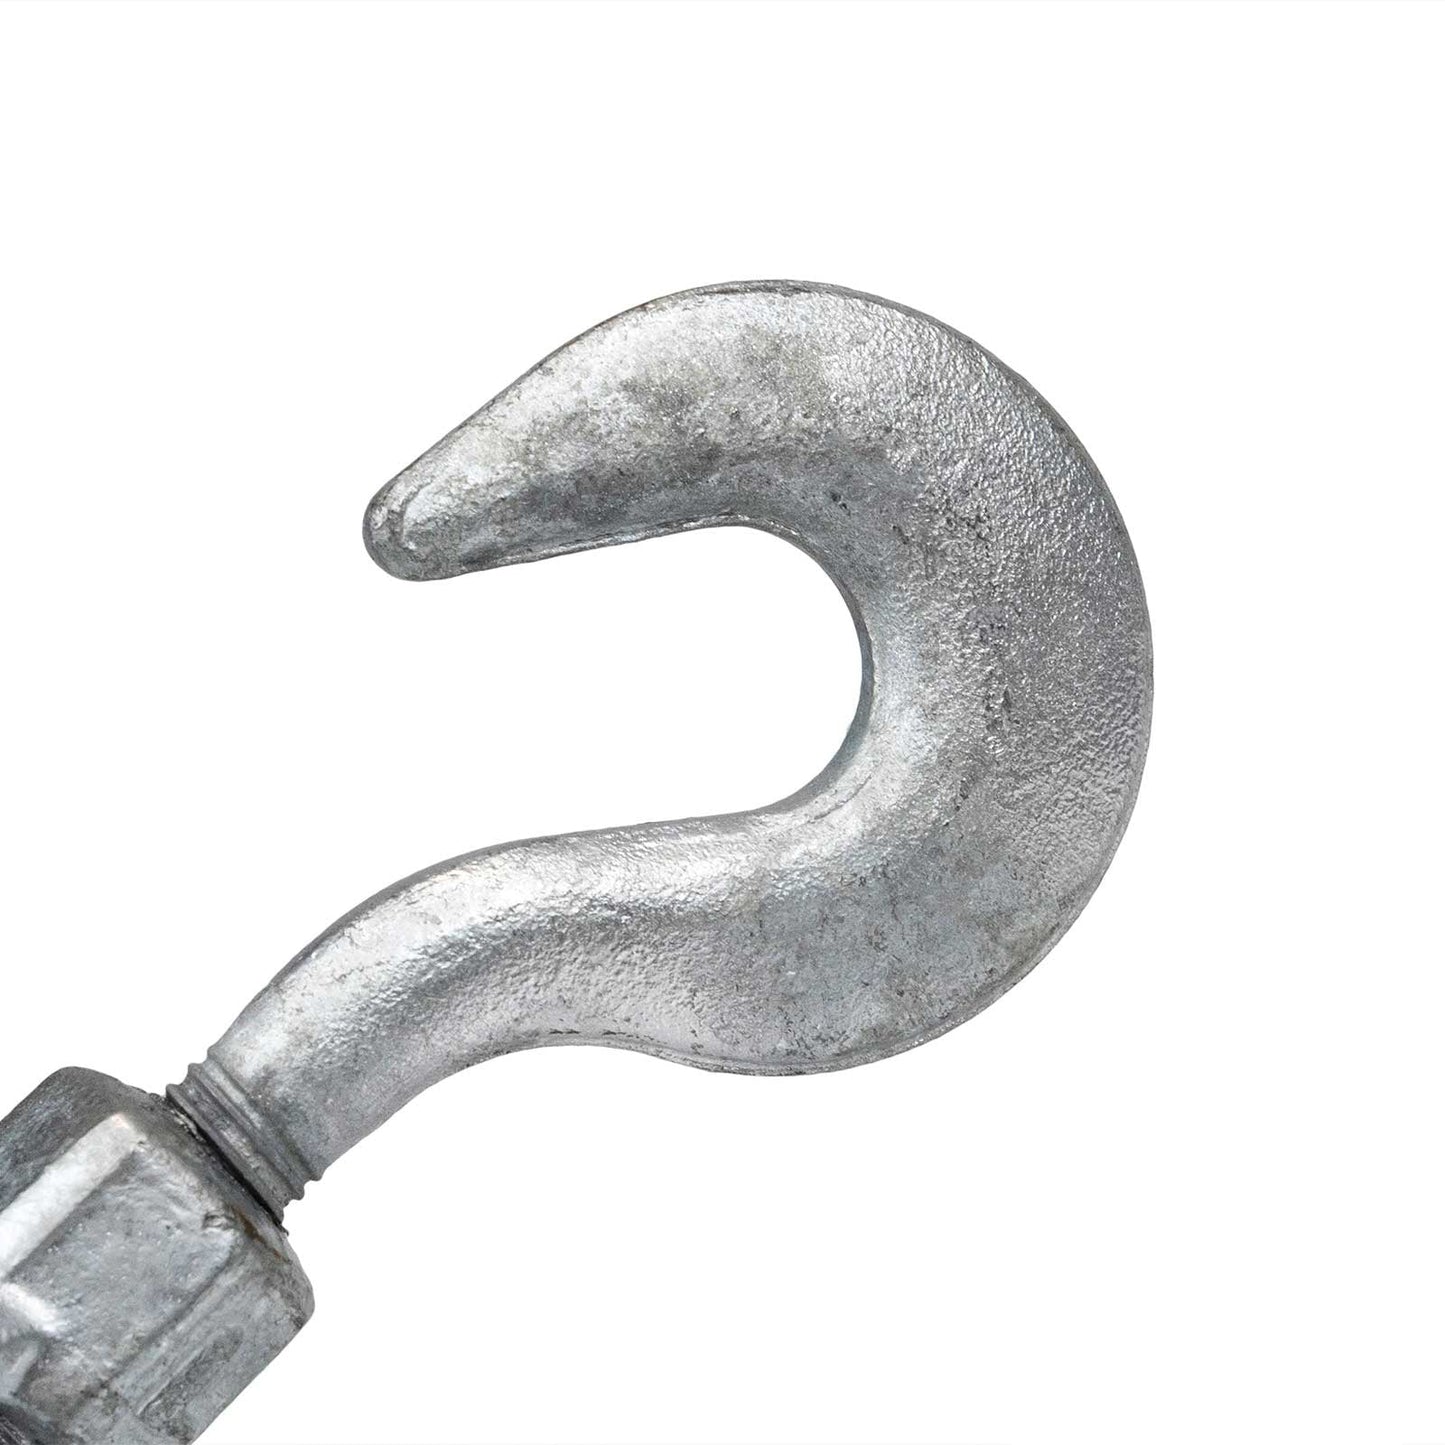 Galvanized Hook and Eye Turnbuckle 3/8” x 12” (extends to 17-1/2